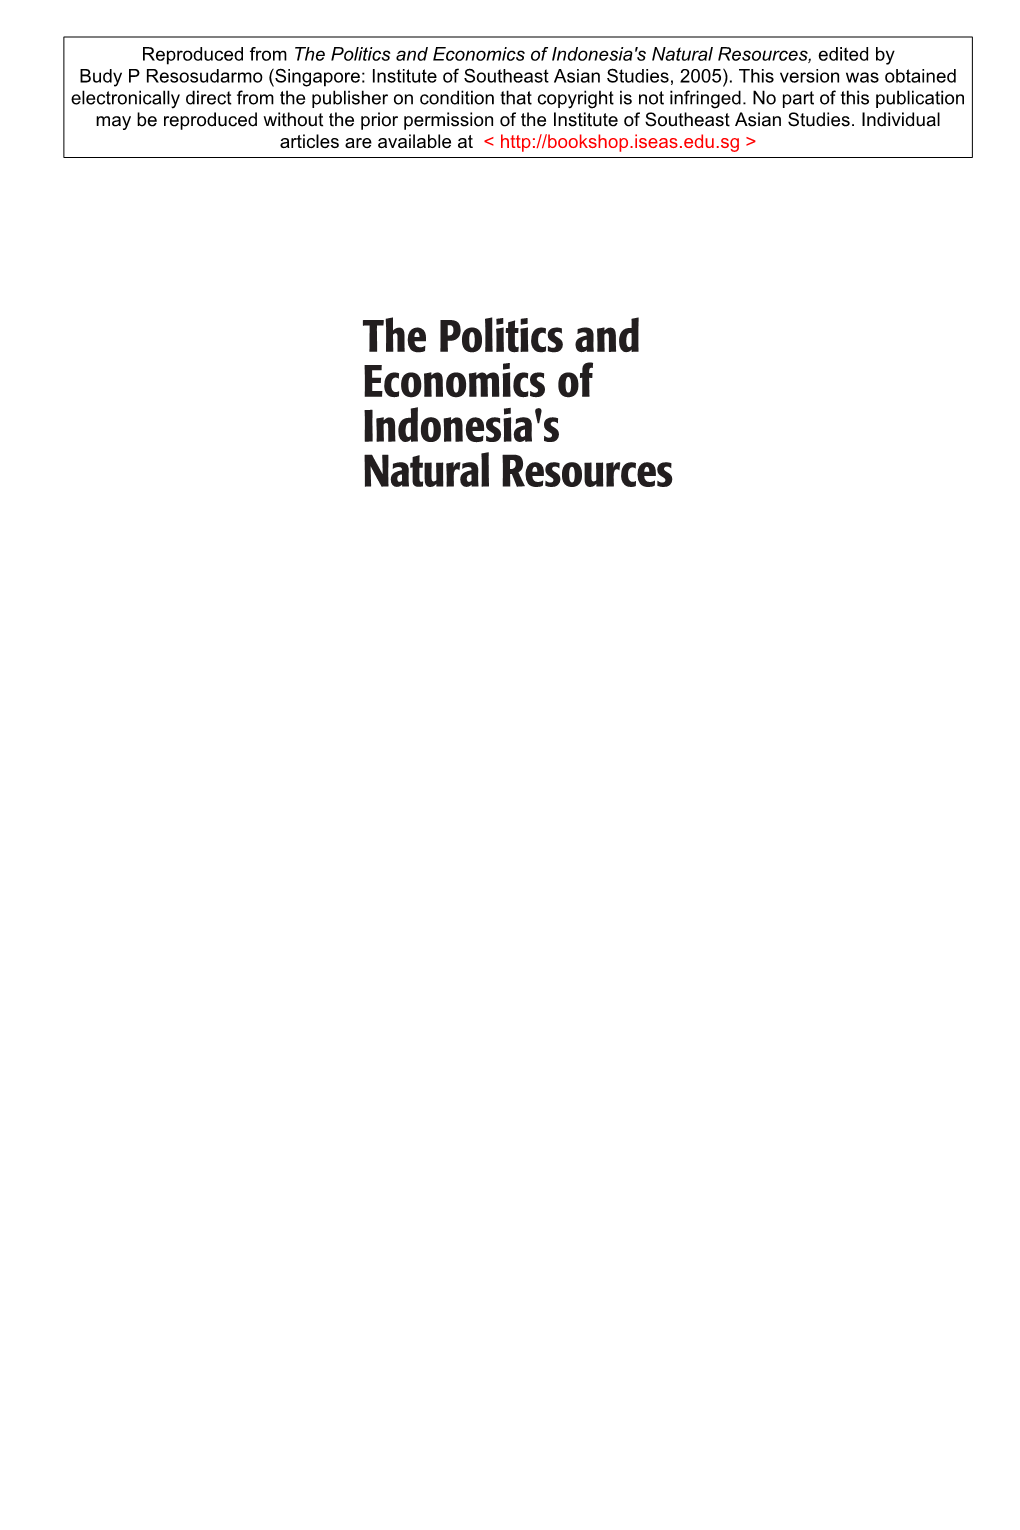 Reproduced from the Politics and Economics of Indonesia's Natural